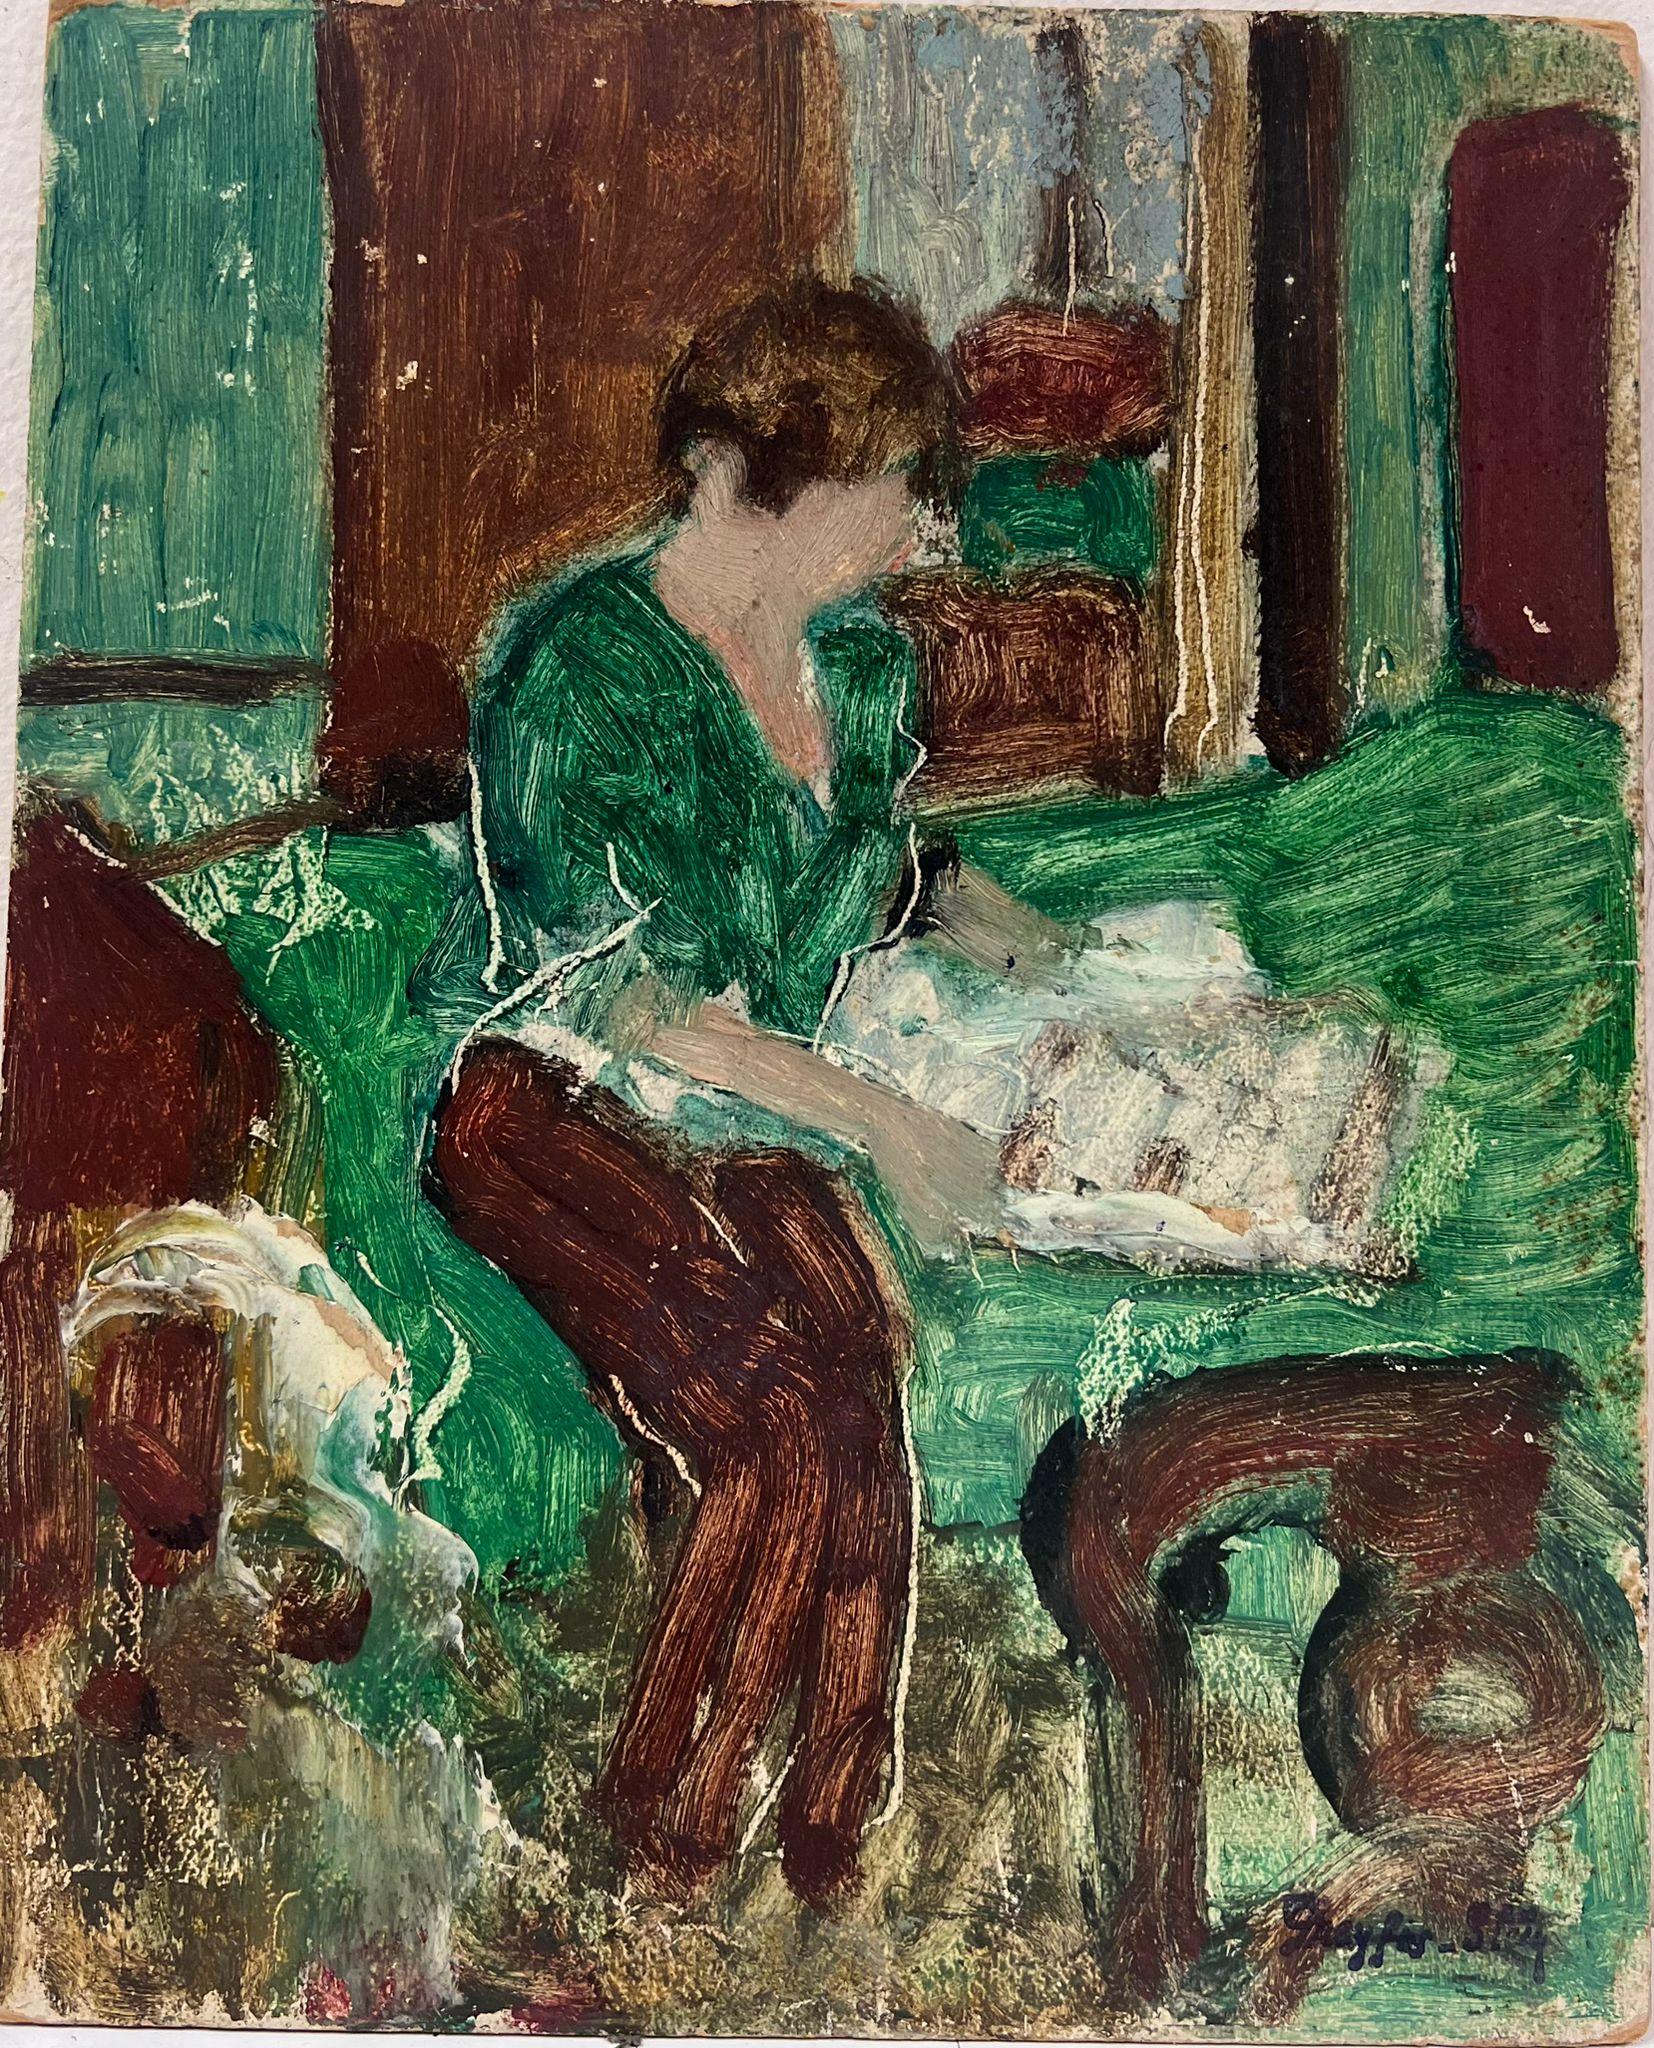 The Green Interior
French modernist, mid 20th century
signed oil on board, unframed
board : 10.5 x 8.5 inches
provenance: private collection, France
condition: good and sound condition 